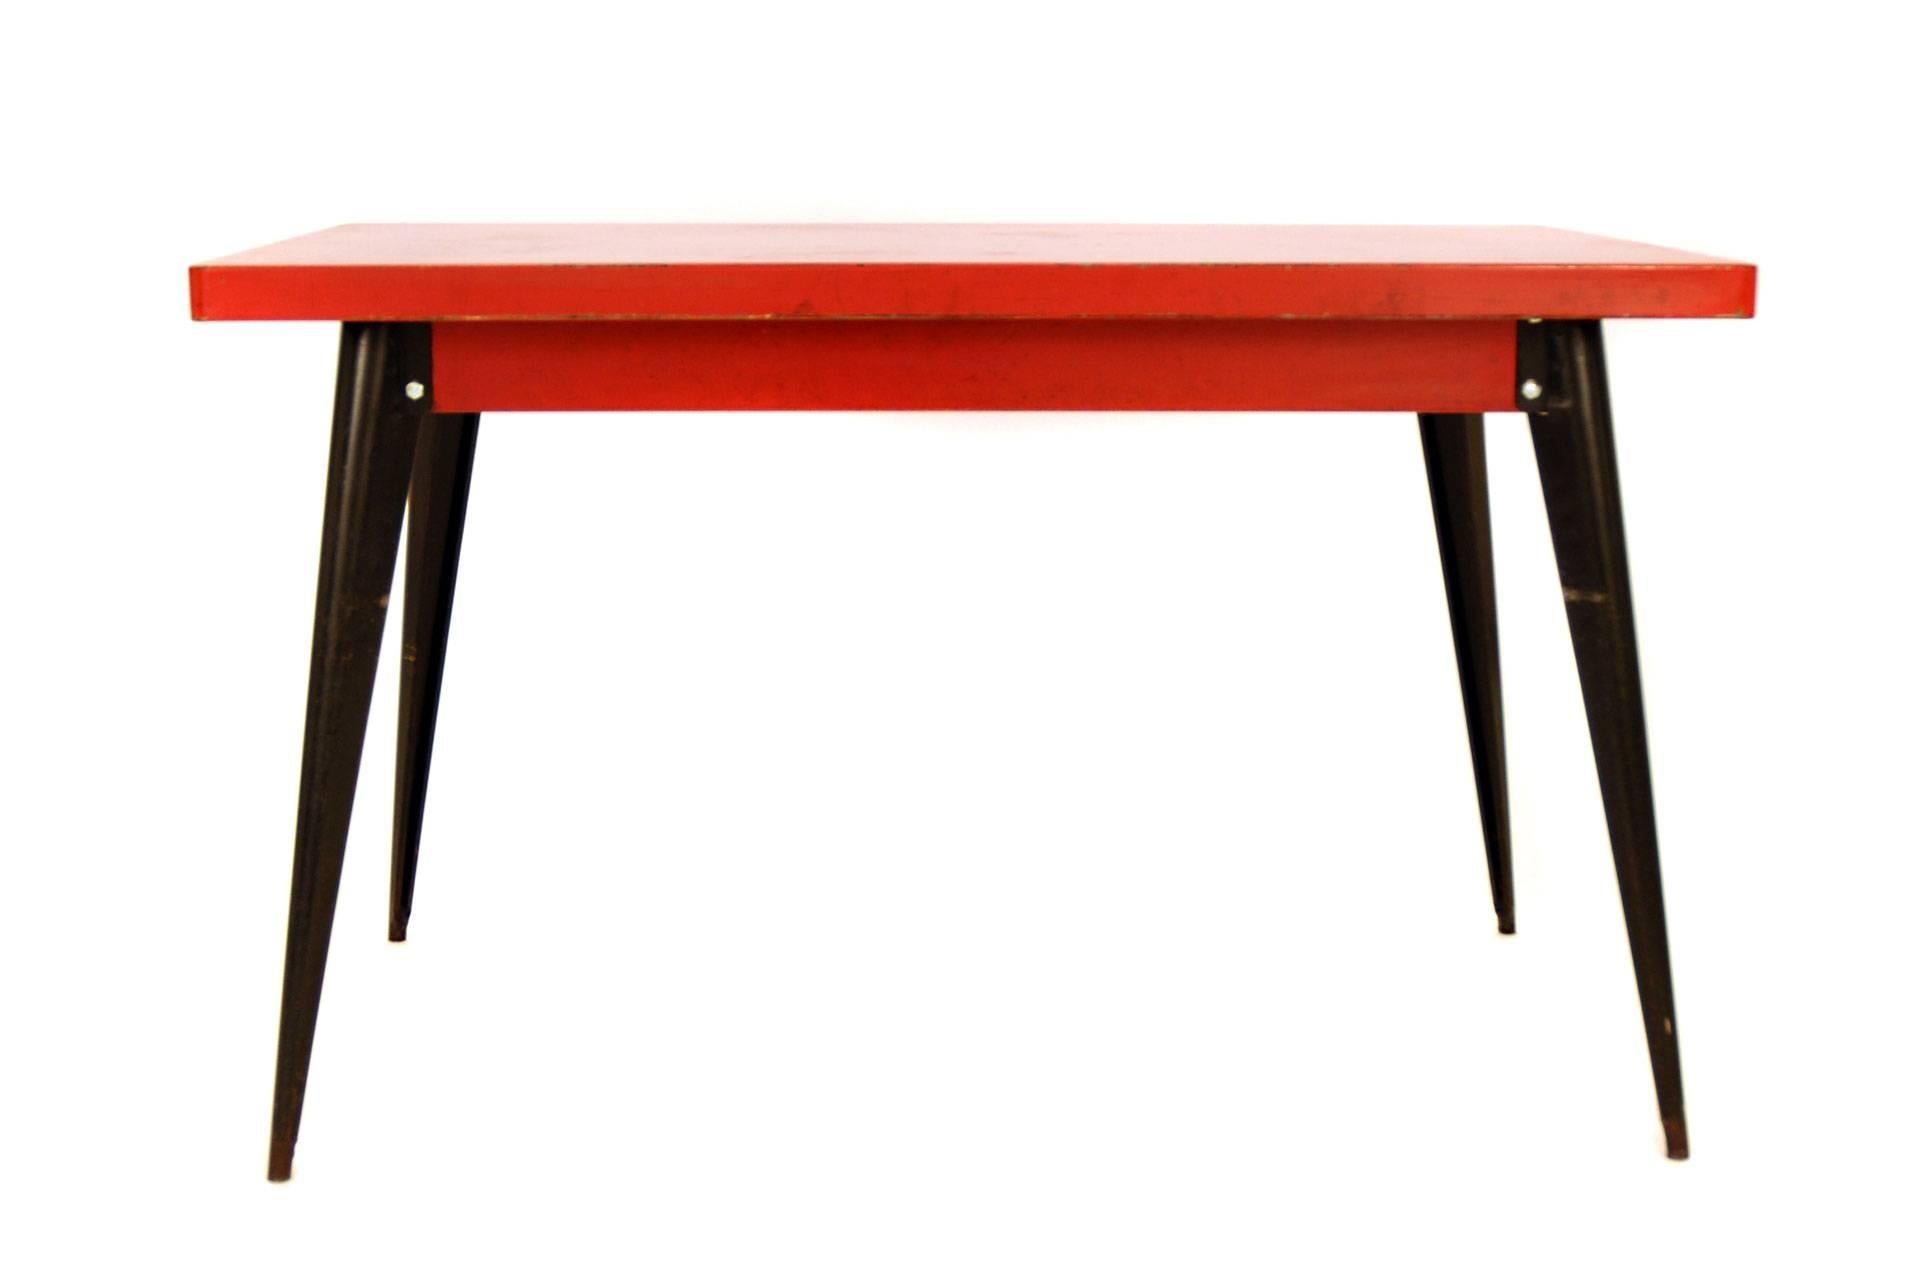 This table was designed by Xavier Pauchard and manufactured by Tolix. It is made of lacquered metal. The furniture frame is in original condition and the tabletop is overworked.